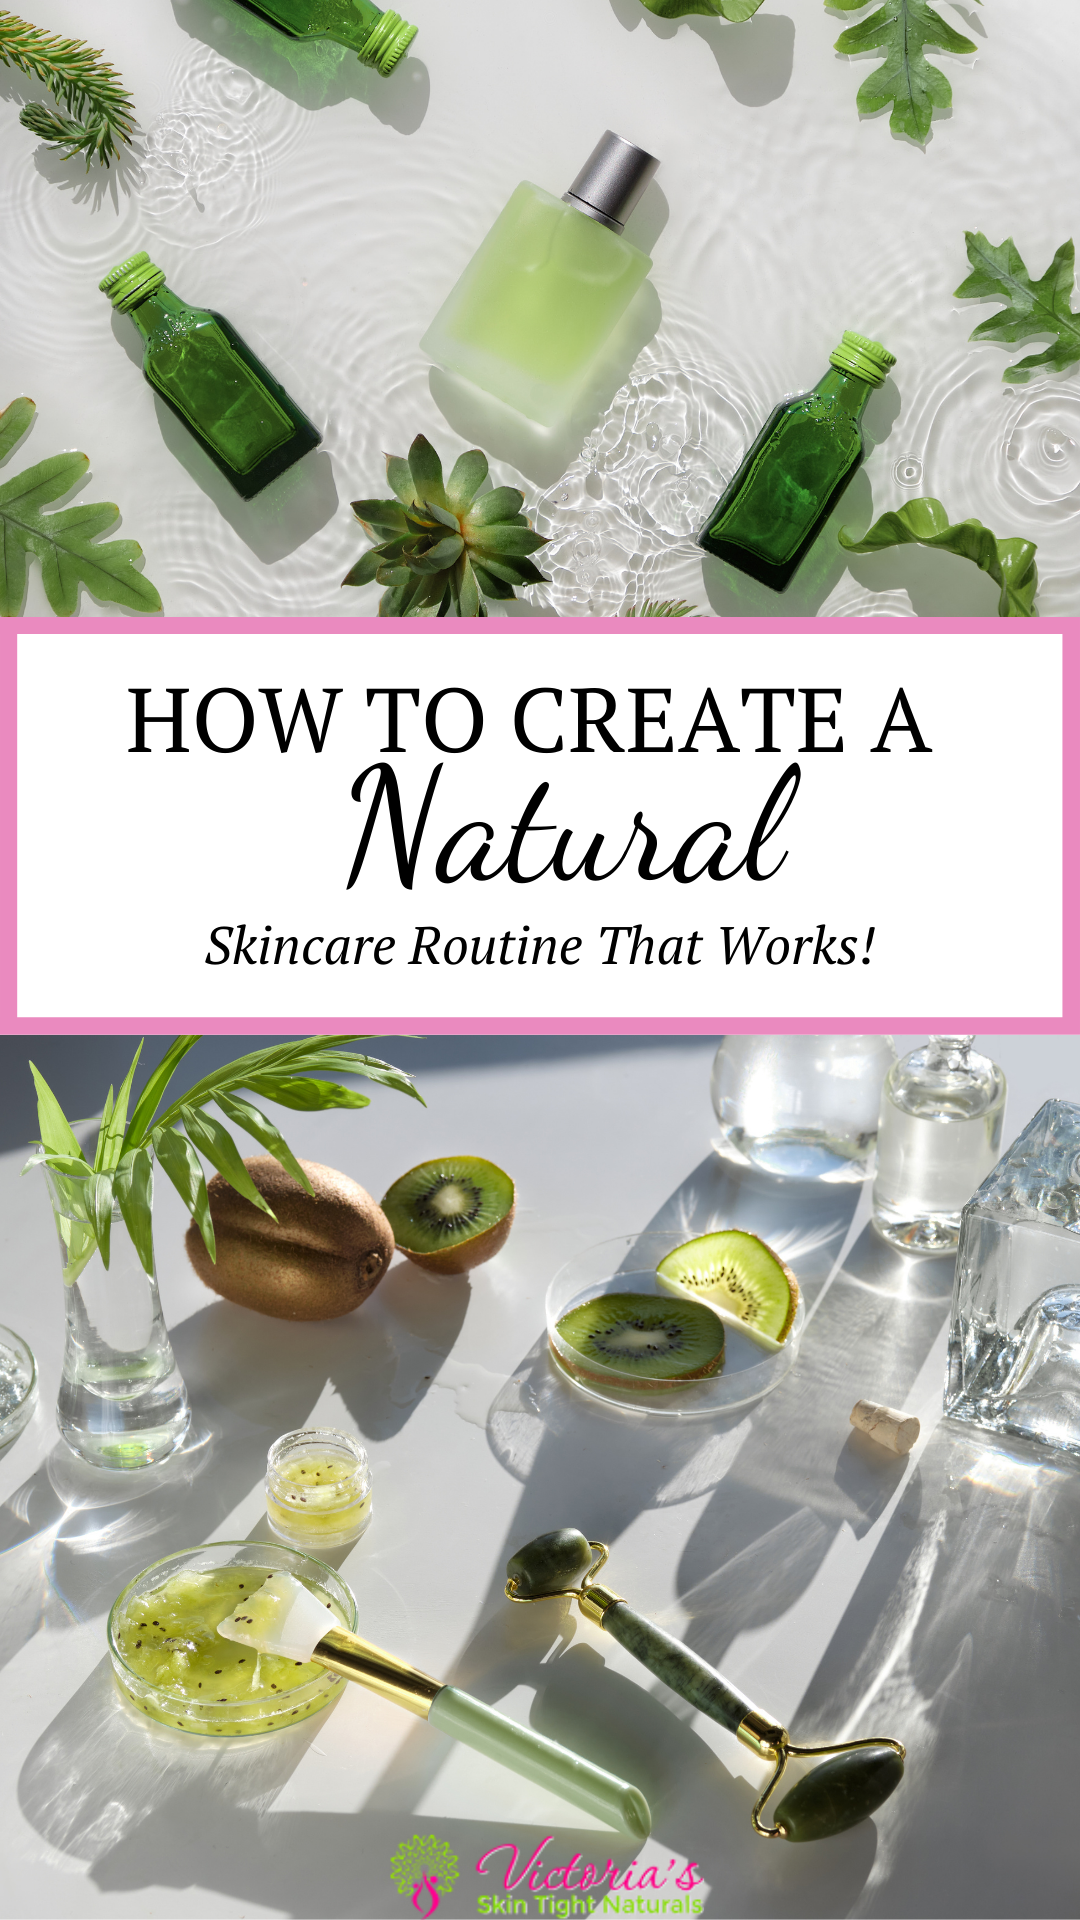 8 Steps To Natural Skin Care